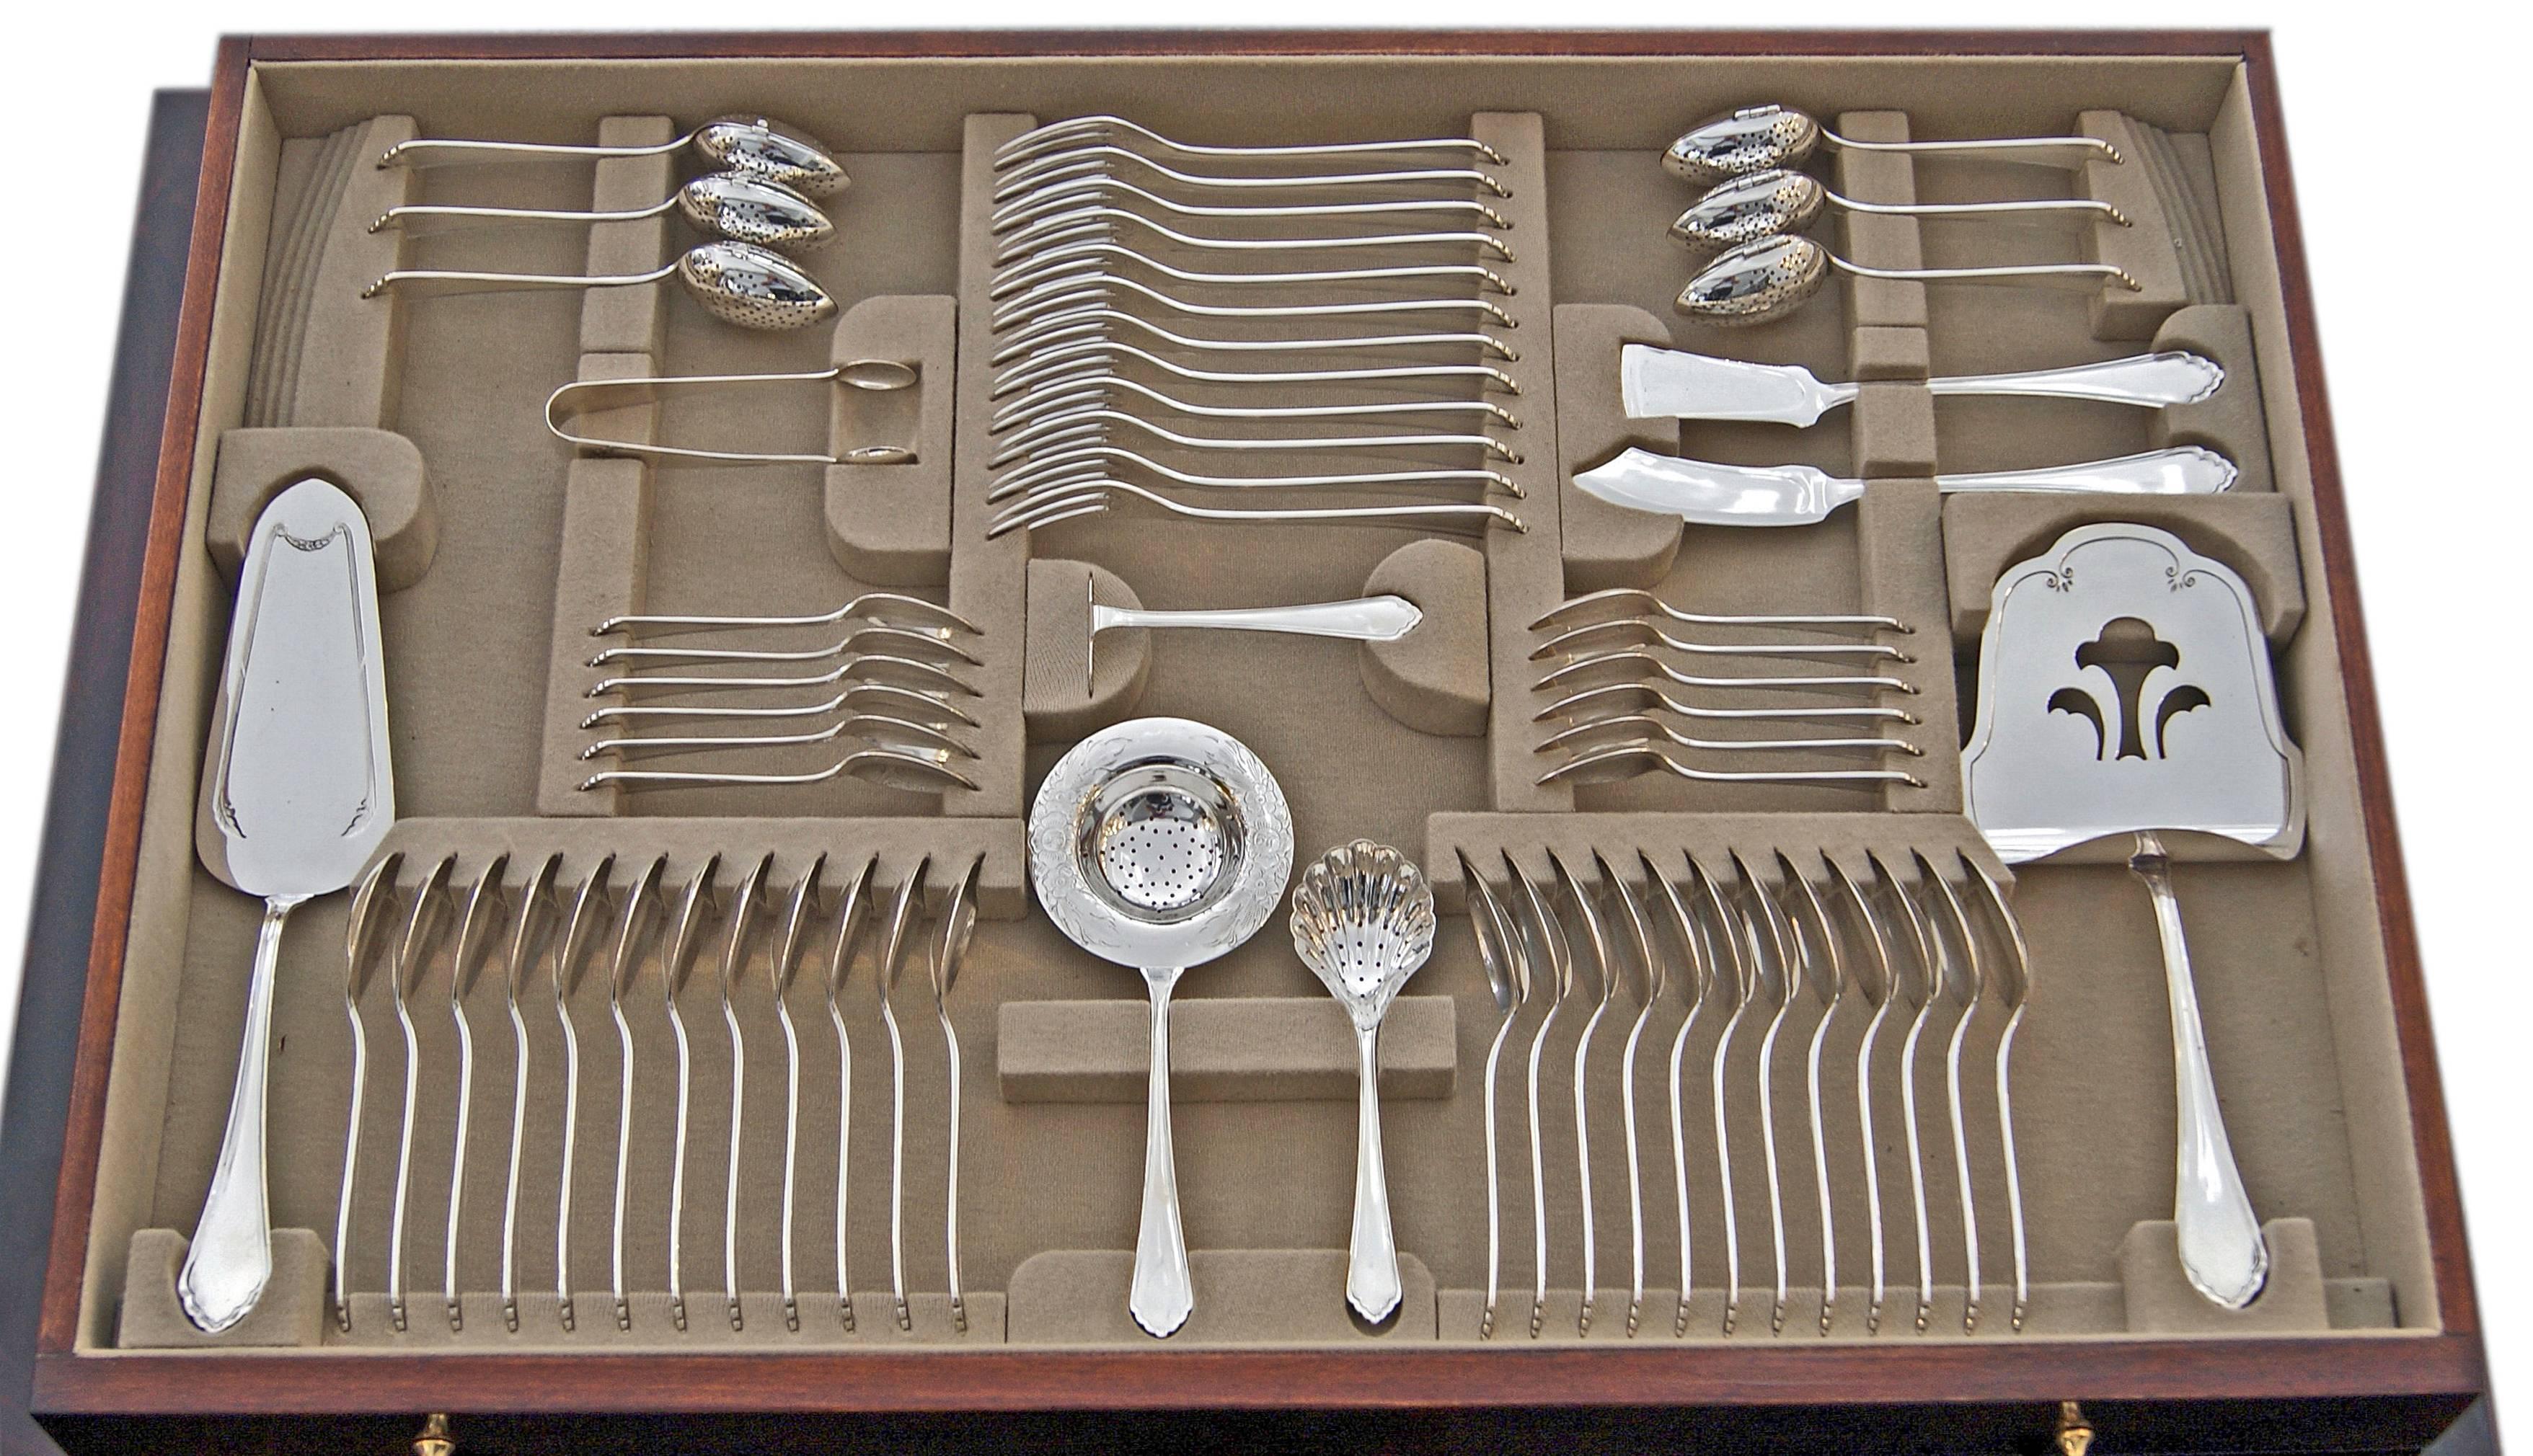 Silver 800 flatware (cutlery set) for 12 persons,
probably made by Burberg & Co., Mettmann / North Rhine-Westphalia, Germany, made circa 1900

German cutlery set / flatware / dinnerware of finest manufacturing quality, consisting of 207 pieces.